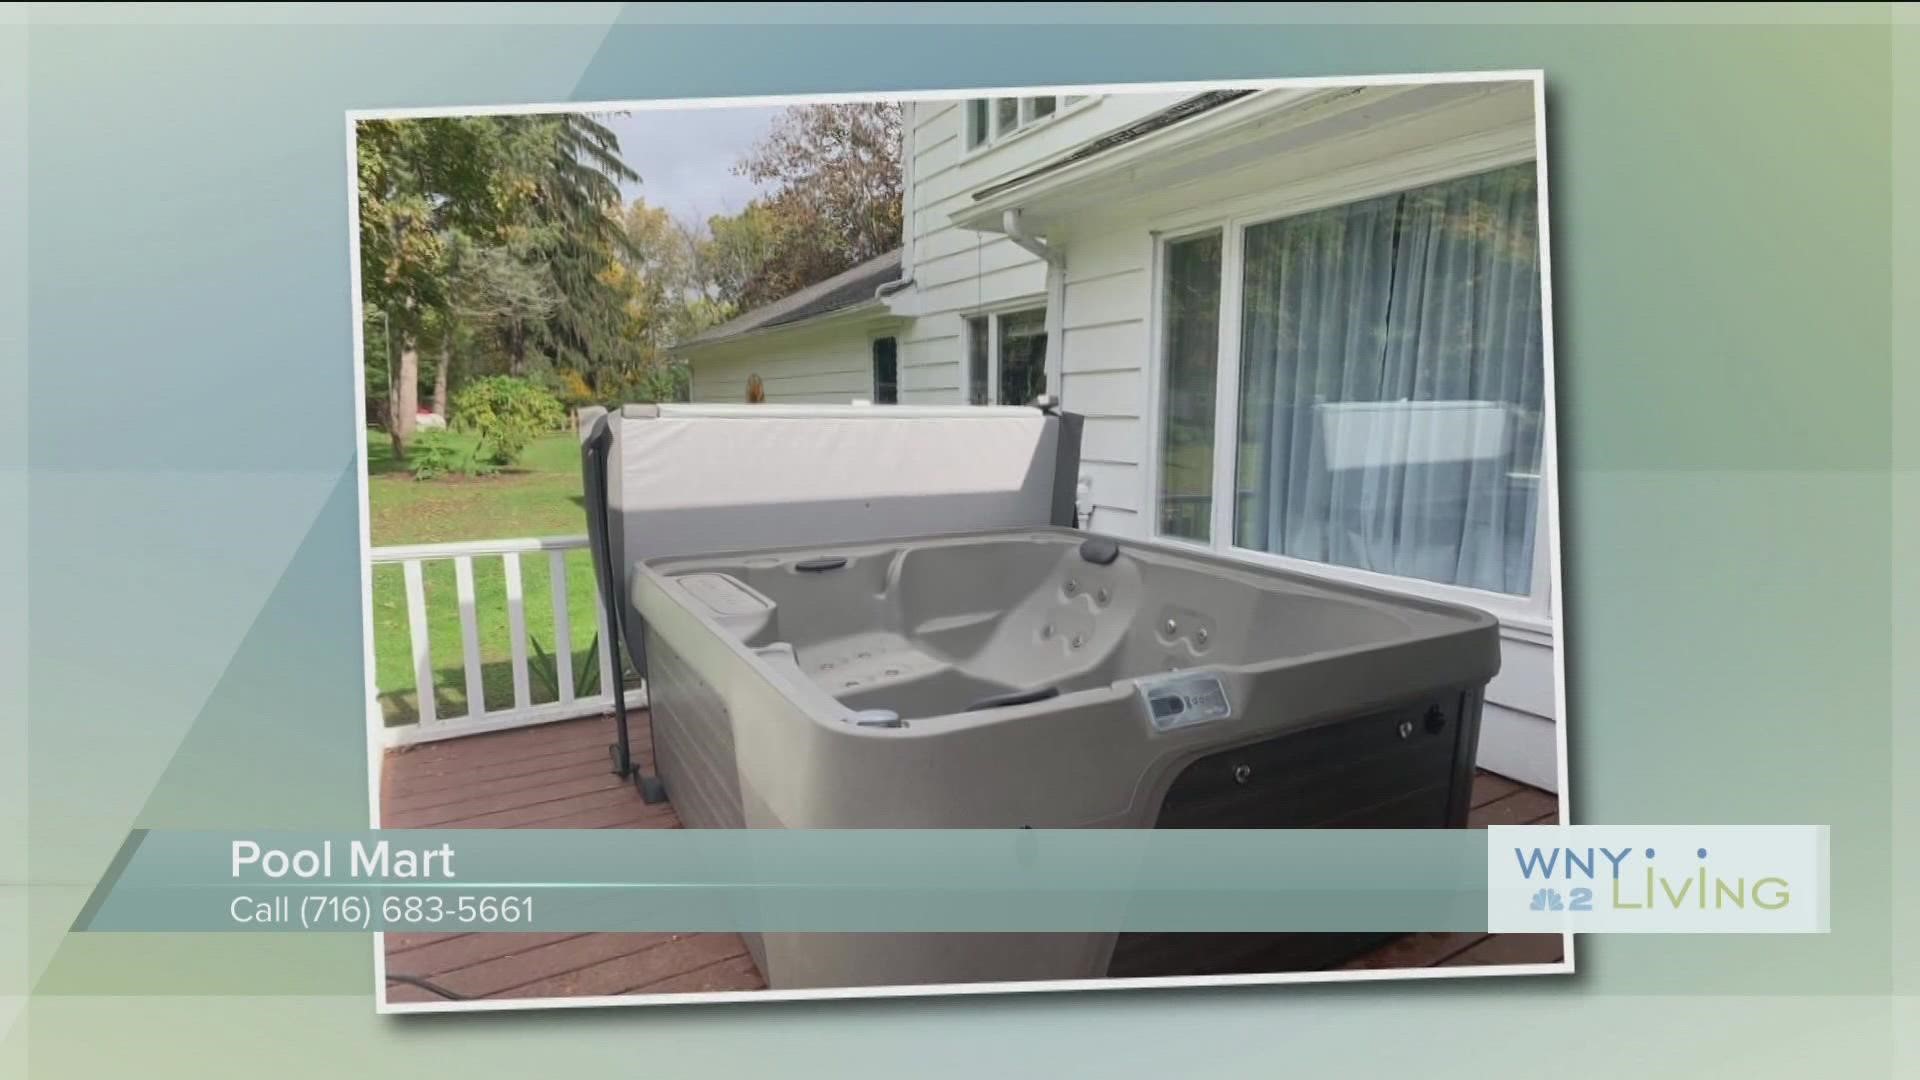 WNY Living - August 6 - Pool Mart (THIS VIDEO IS SPONSORED BY POOL MART)